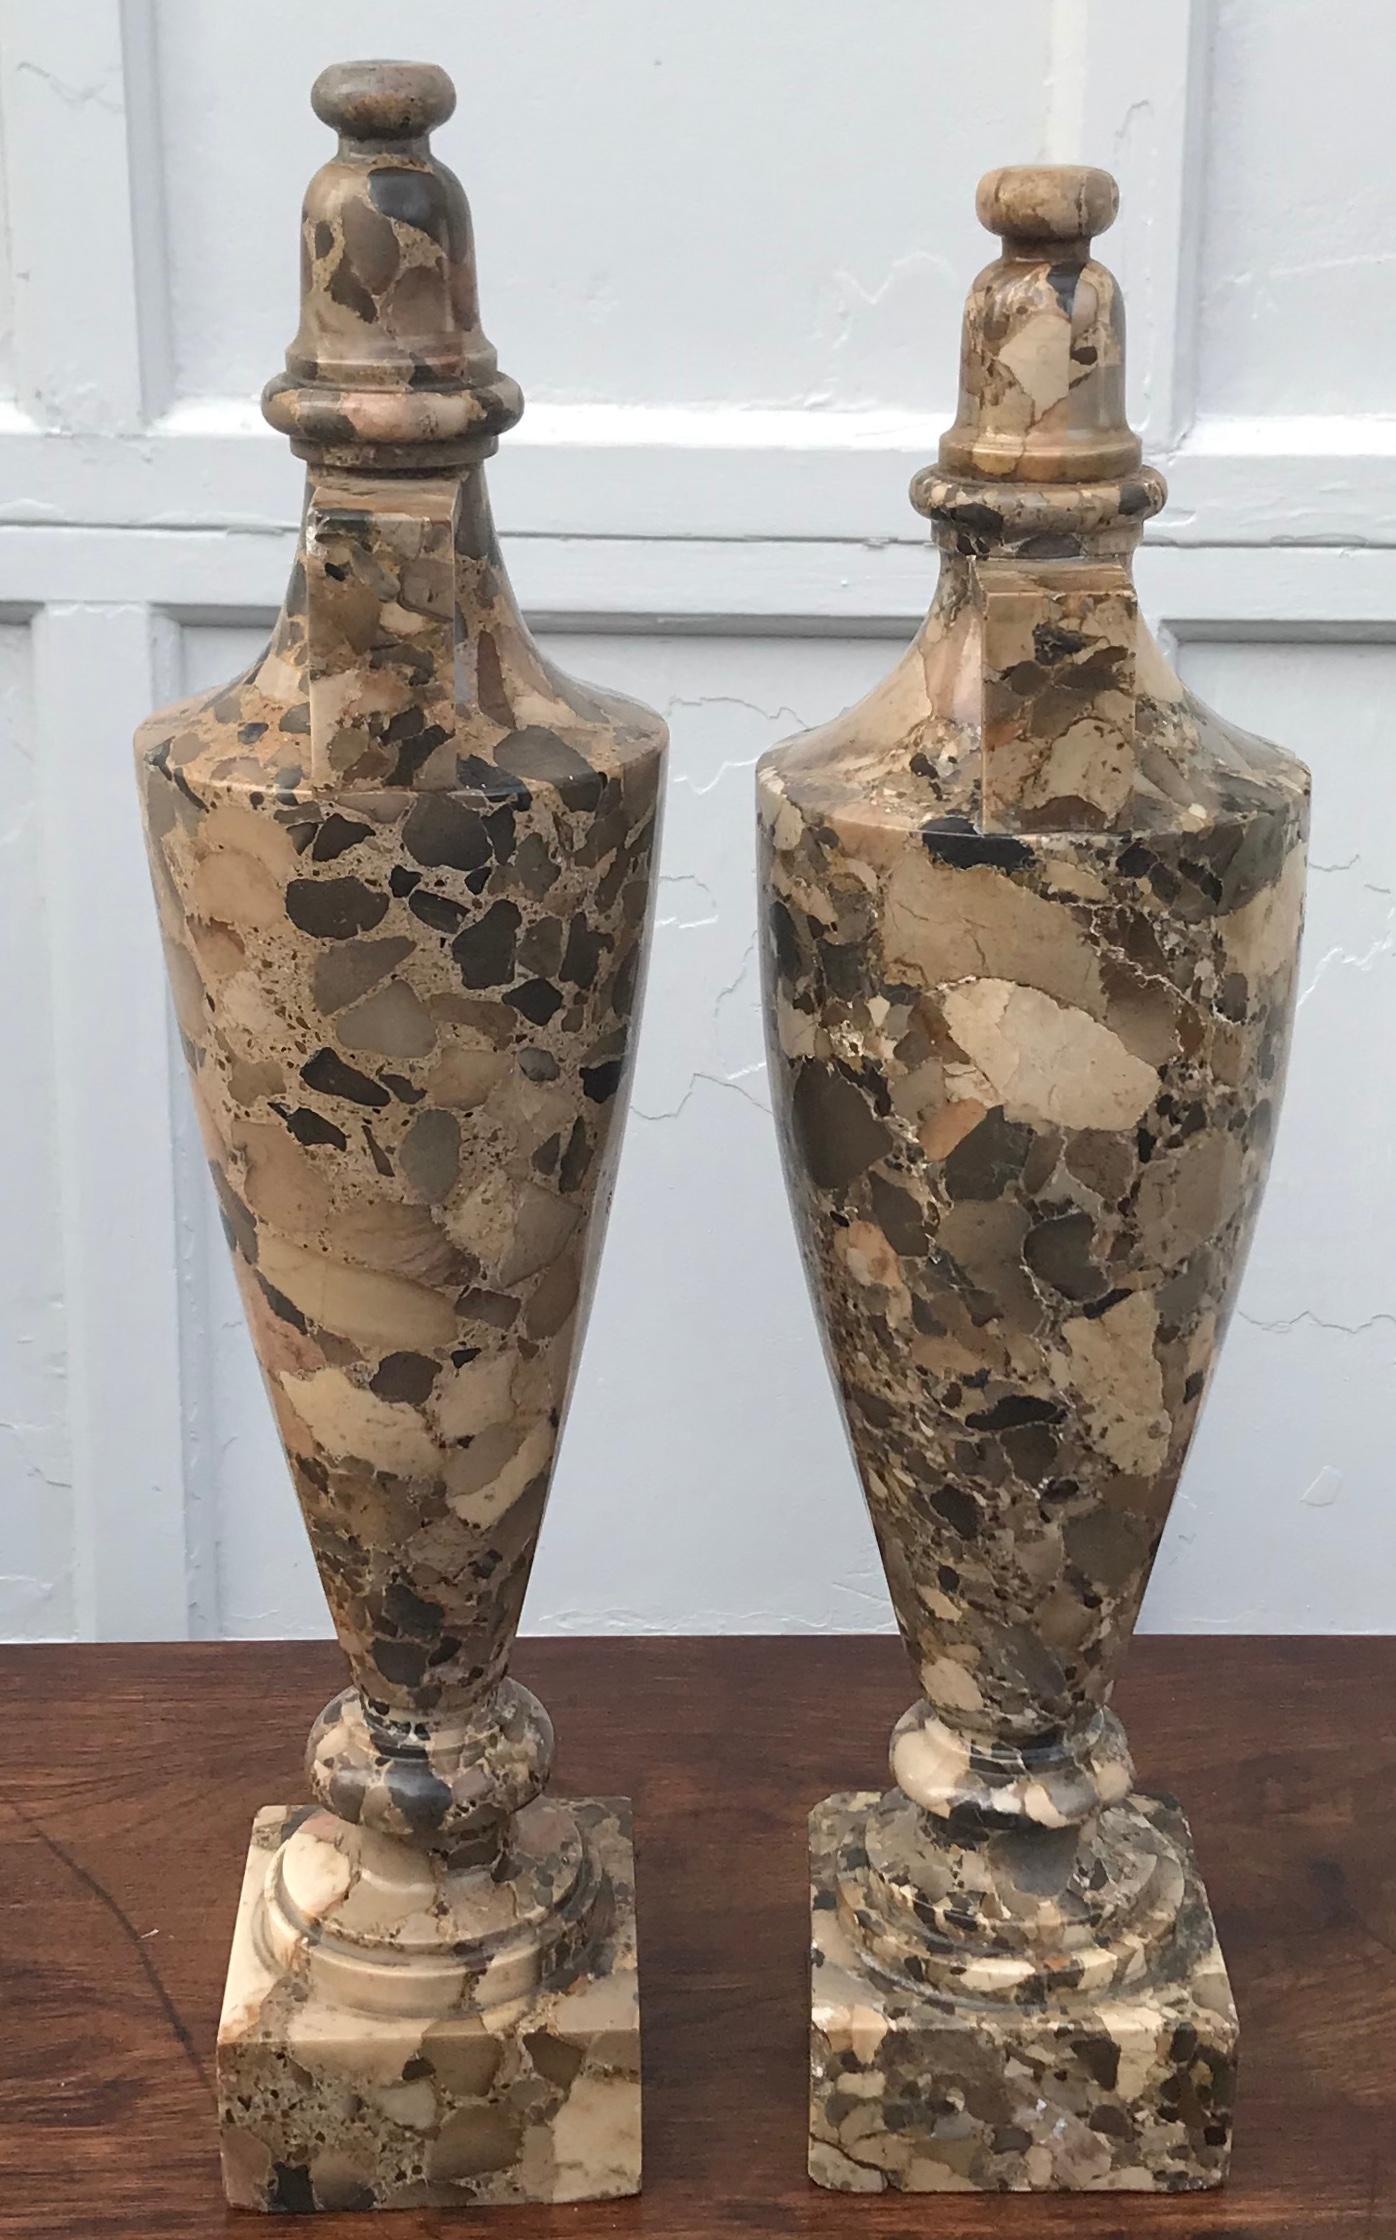 Pair of Breccia marble Amphora urns. Near pair urns in rich brown and coffee colored Italian Breccias marble urn of the Charles X period with black and grey highlights fashioned in a modernistic Amphora style with angled handles capped by an